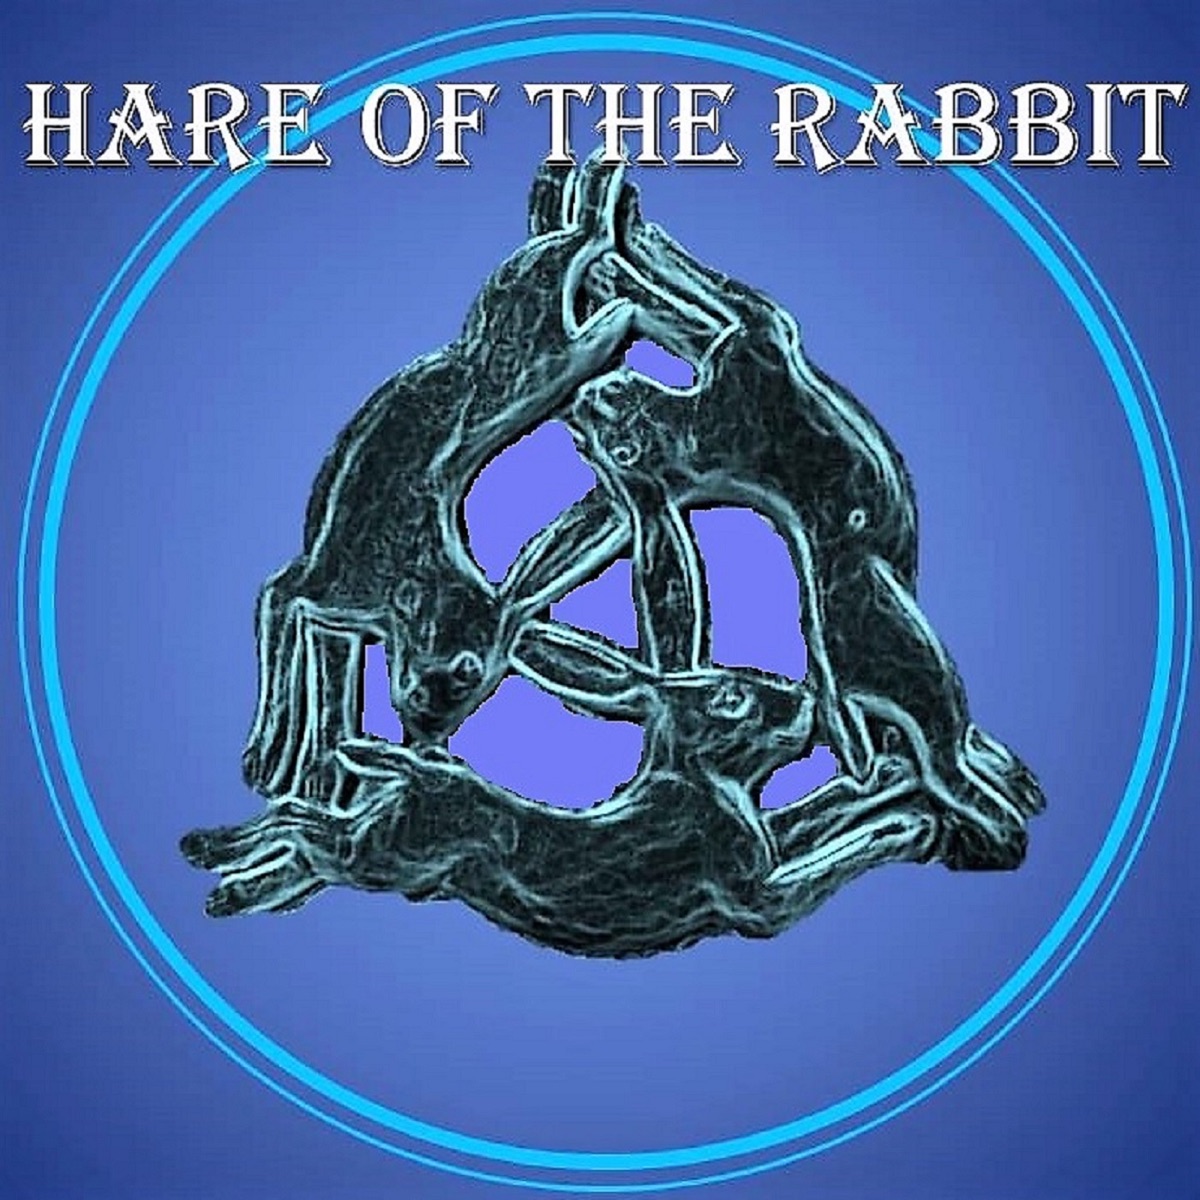 Hare of the rabbit podcast – Podcast – Podtail